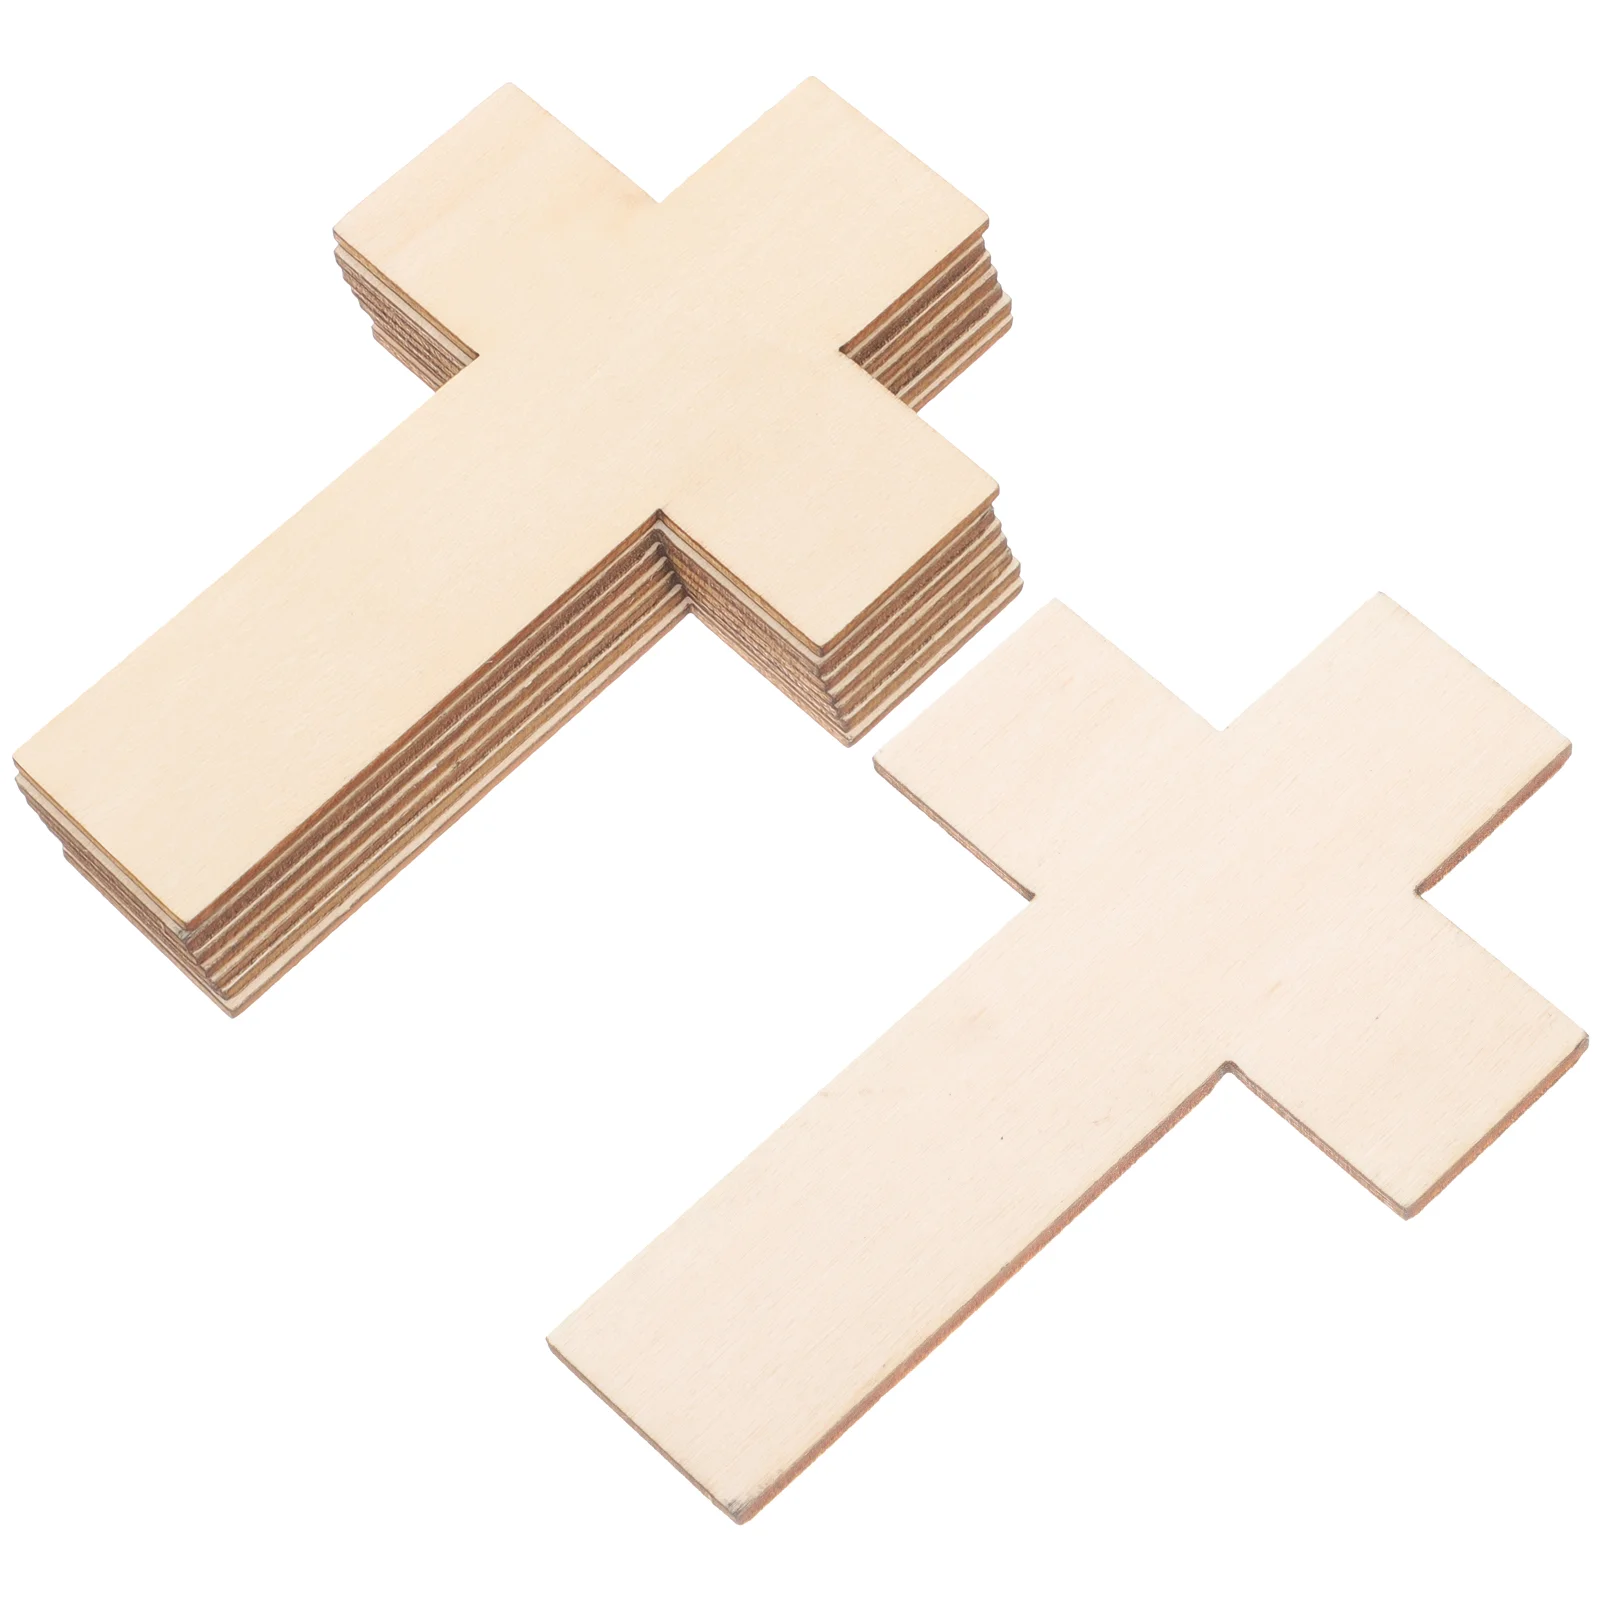 

20 Pcs Easter Party Gift Tags Unfinished Cross Wooden Pieces Decor Home Shaped Toys Children Slices Crafts Blank DIY